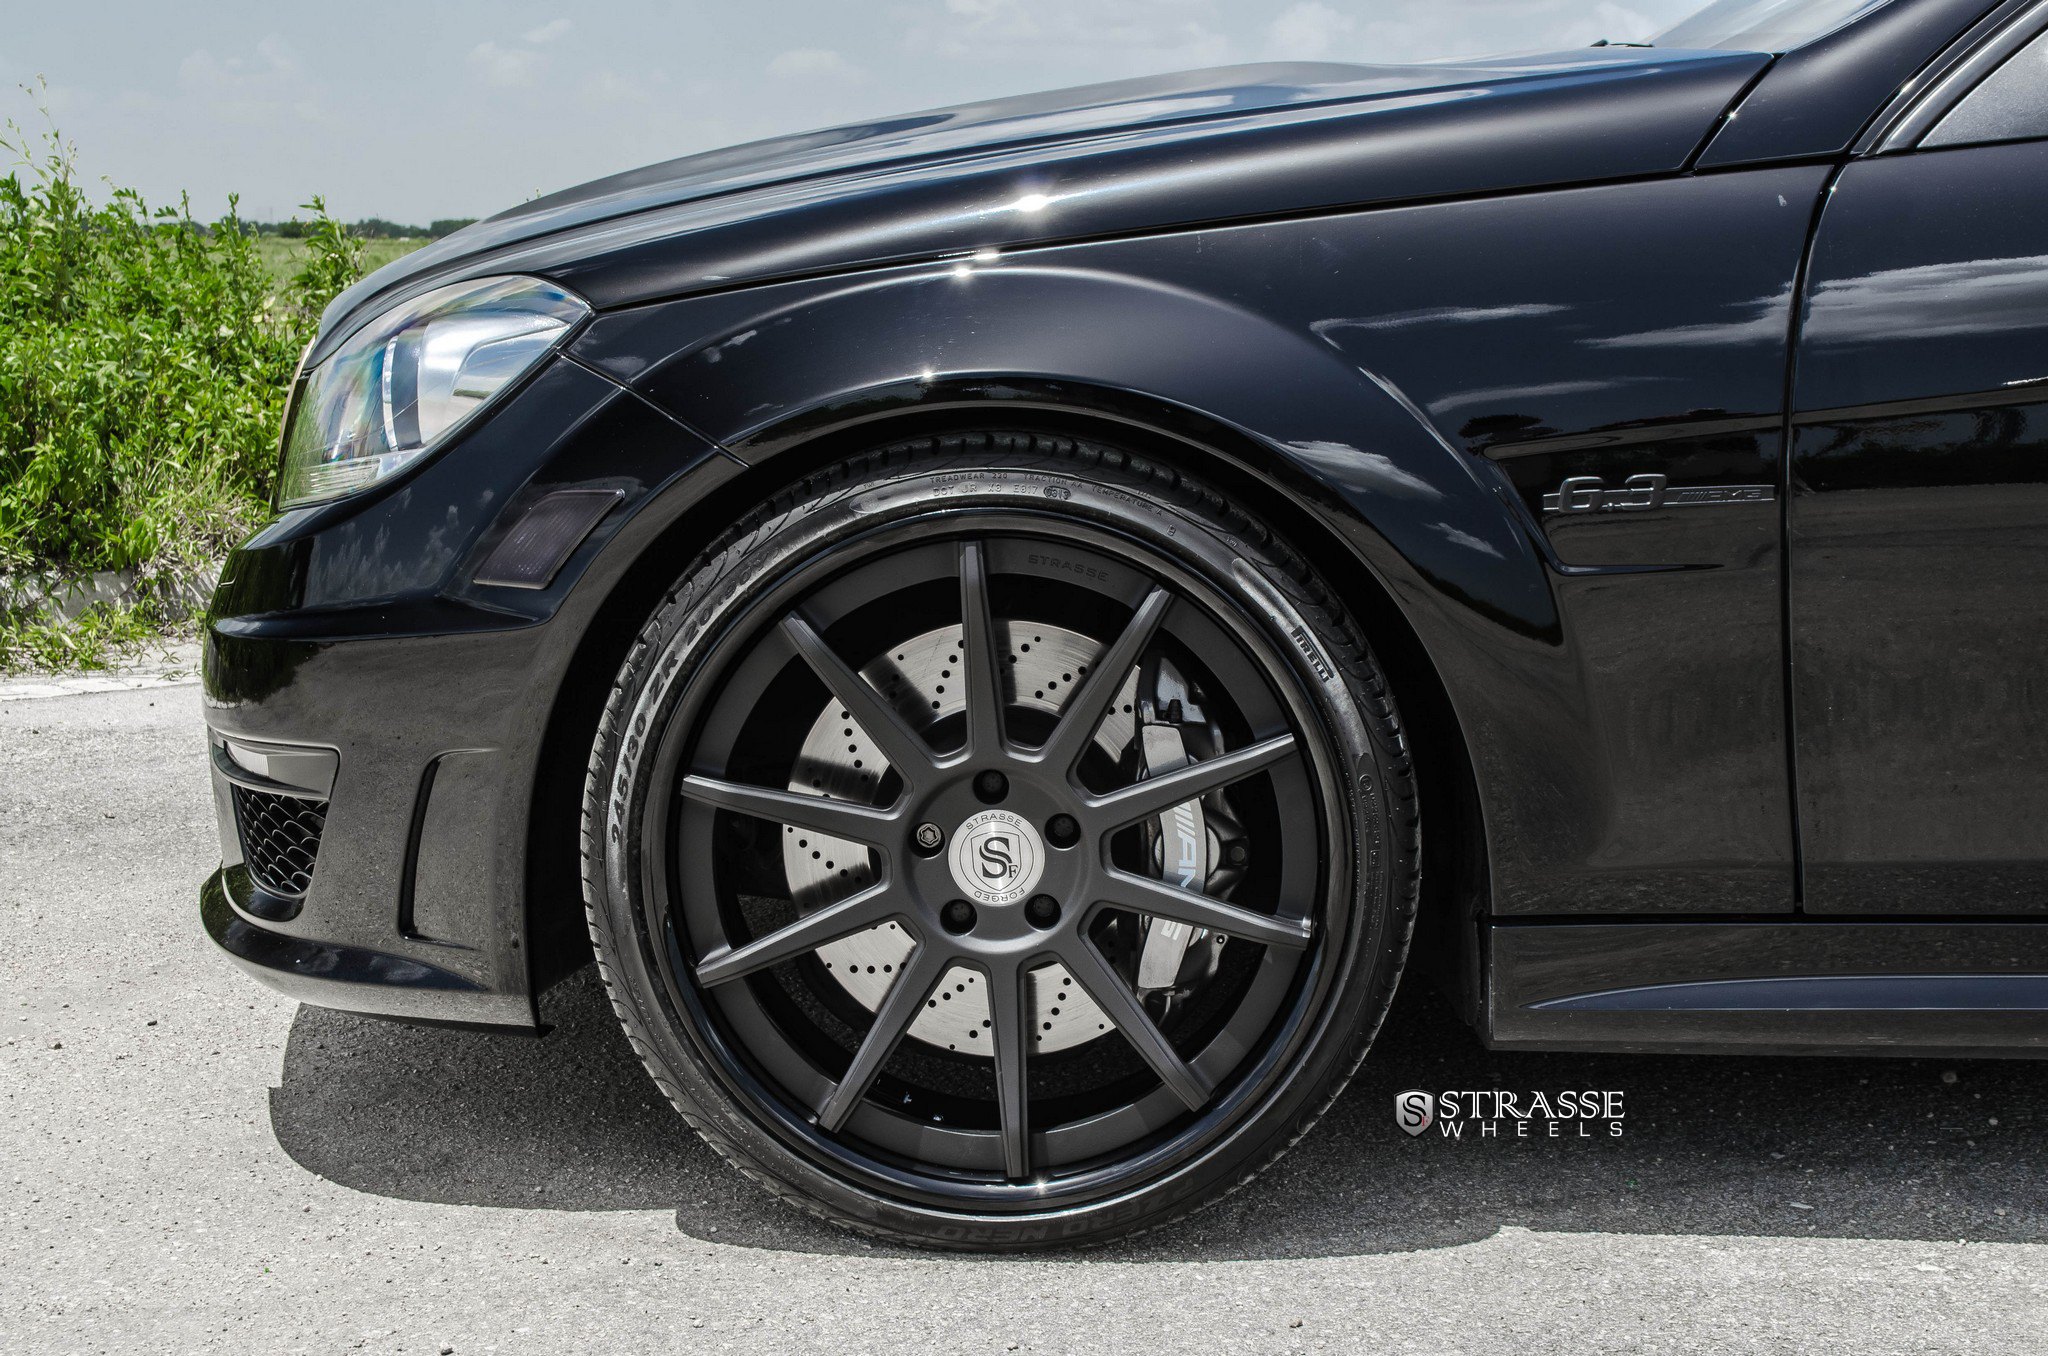 Black Mercedes C-Class 6.3 with Custom Side Skirts - Photo by Strasse Forged